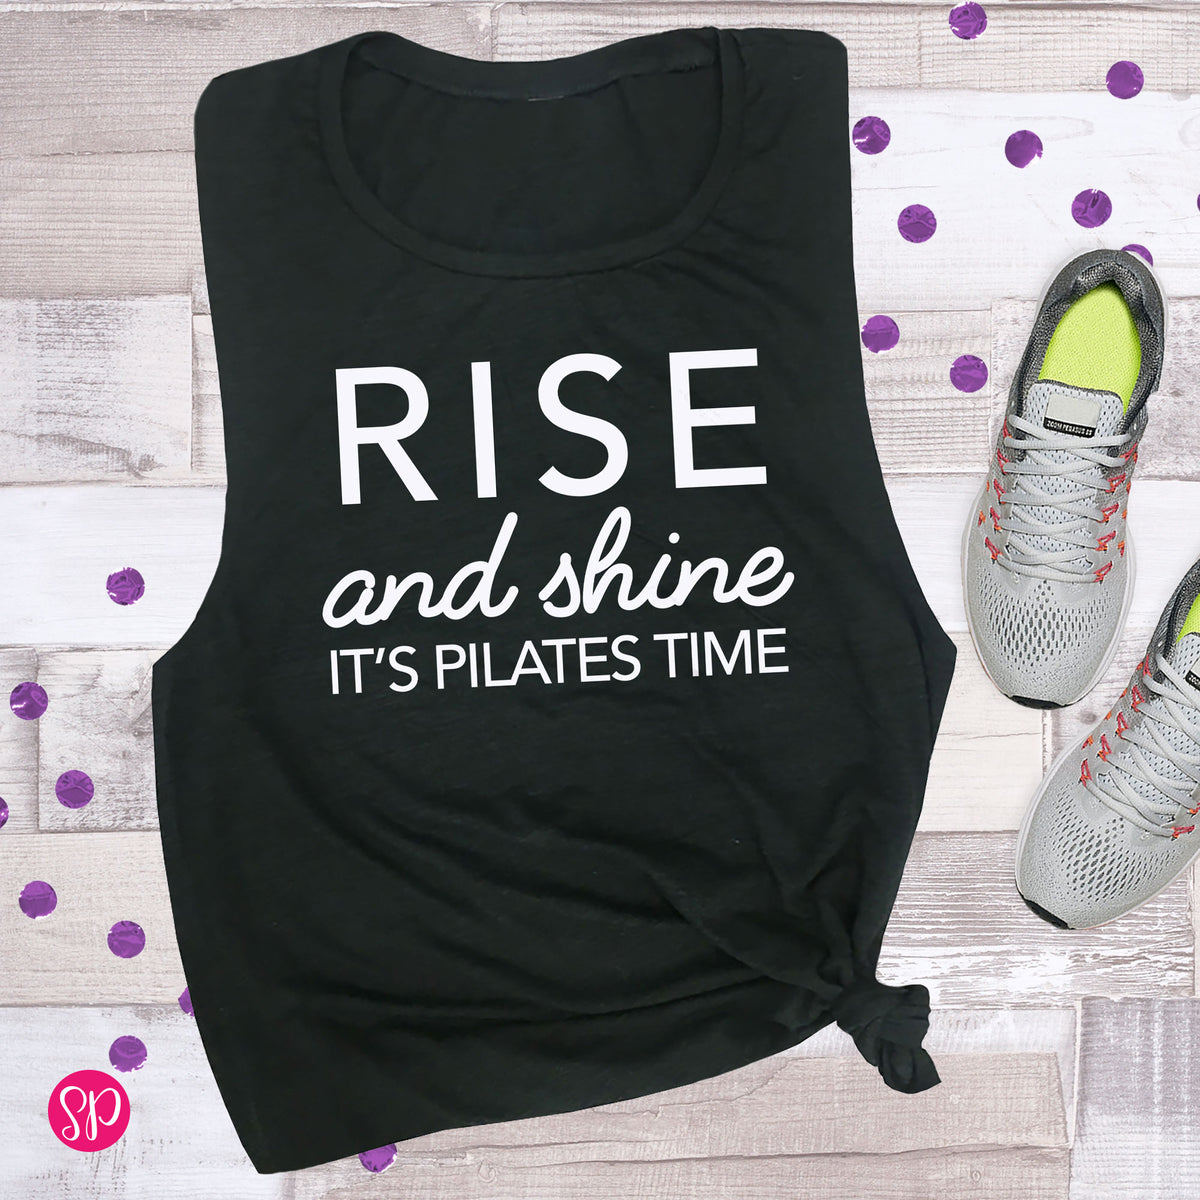 Rise and Shine It's Pilates Time Pilate Workout Fitness Morning Muscle Tank Tee Shirt Women